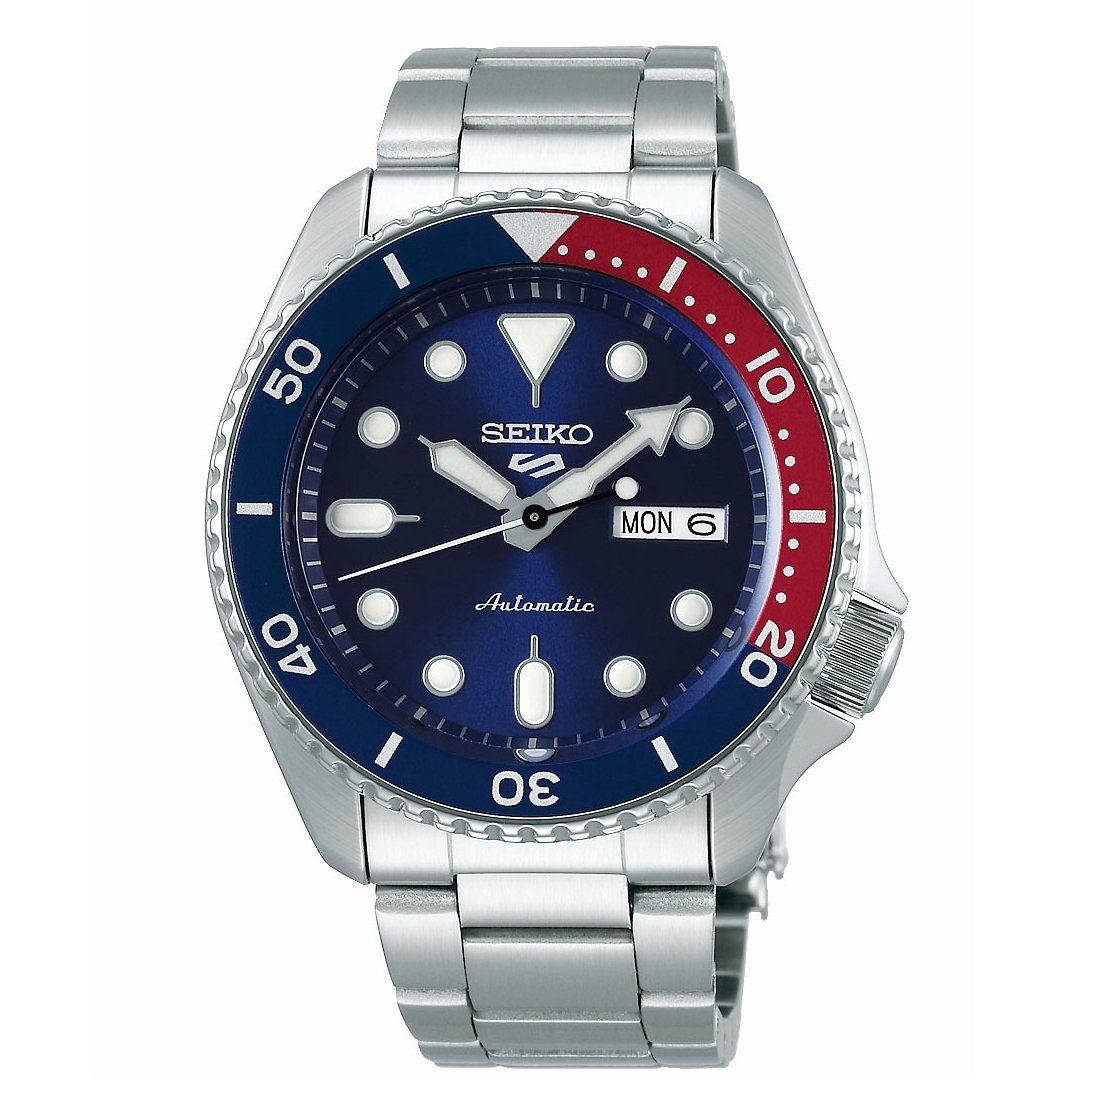 Seiko Automatic Red, Blue & Silver Watch SRPD53K Watches Seiko 